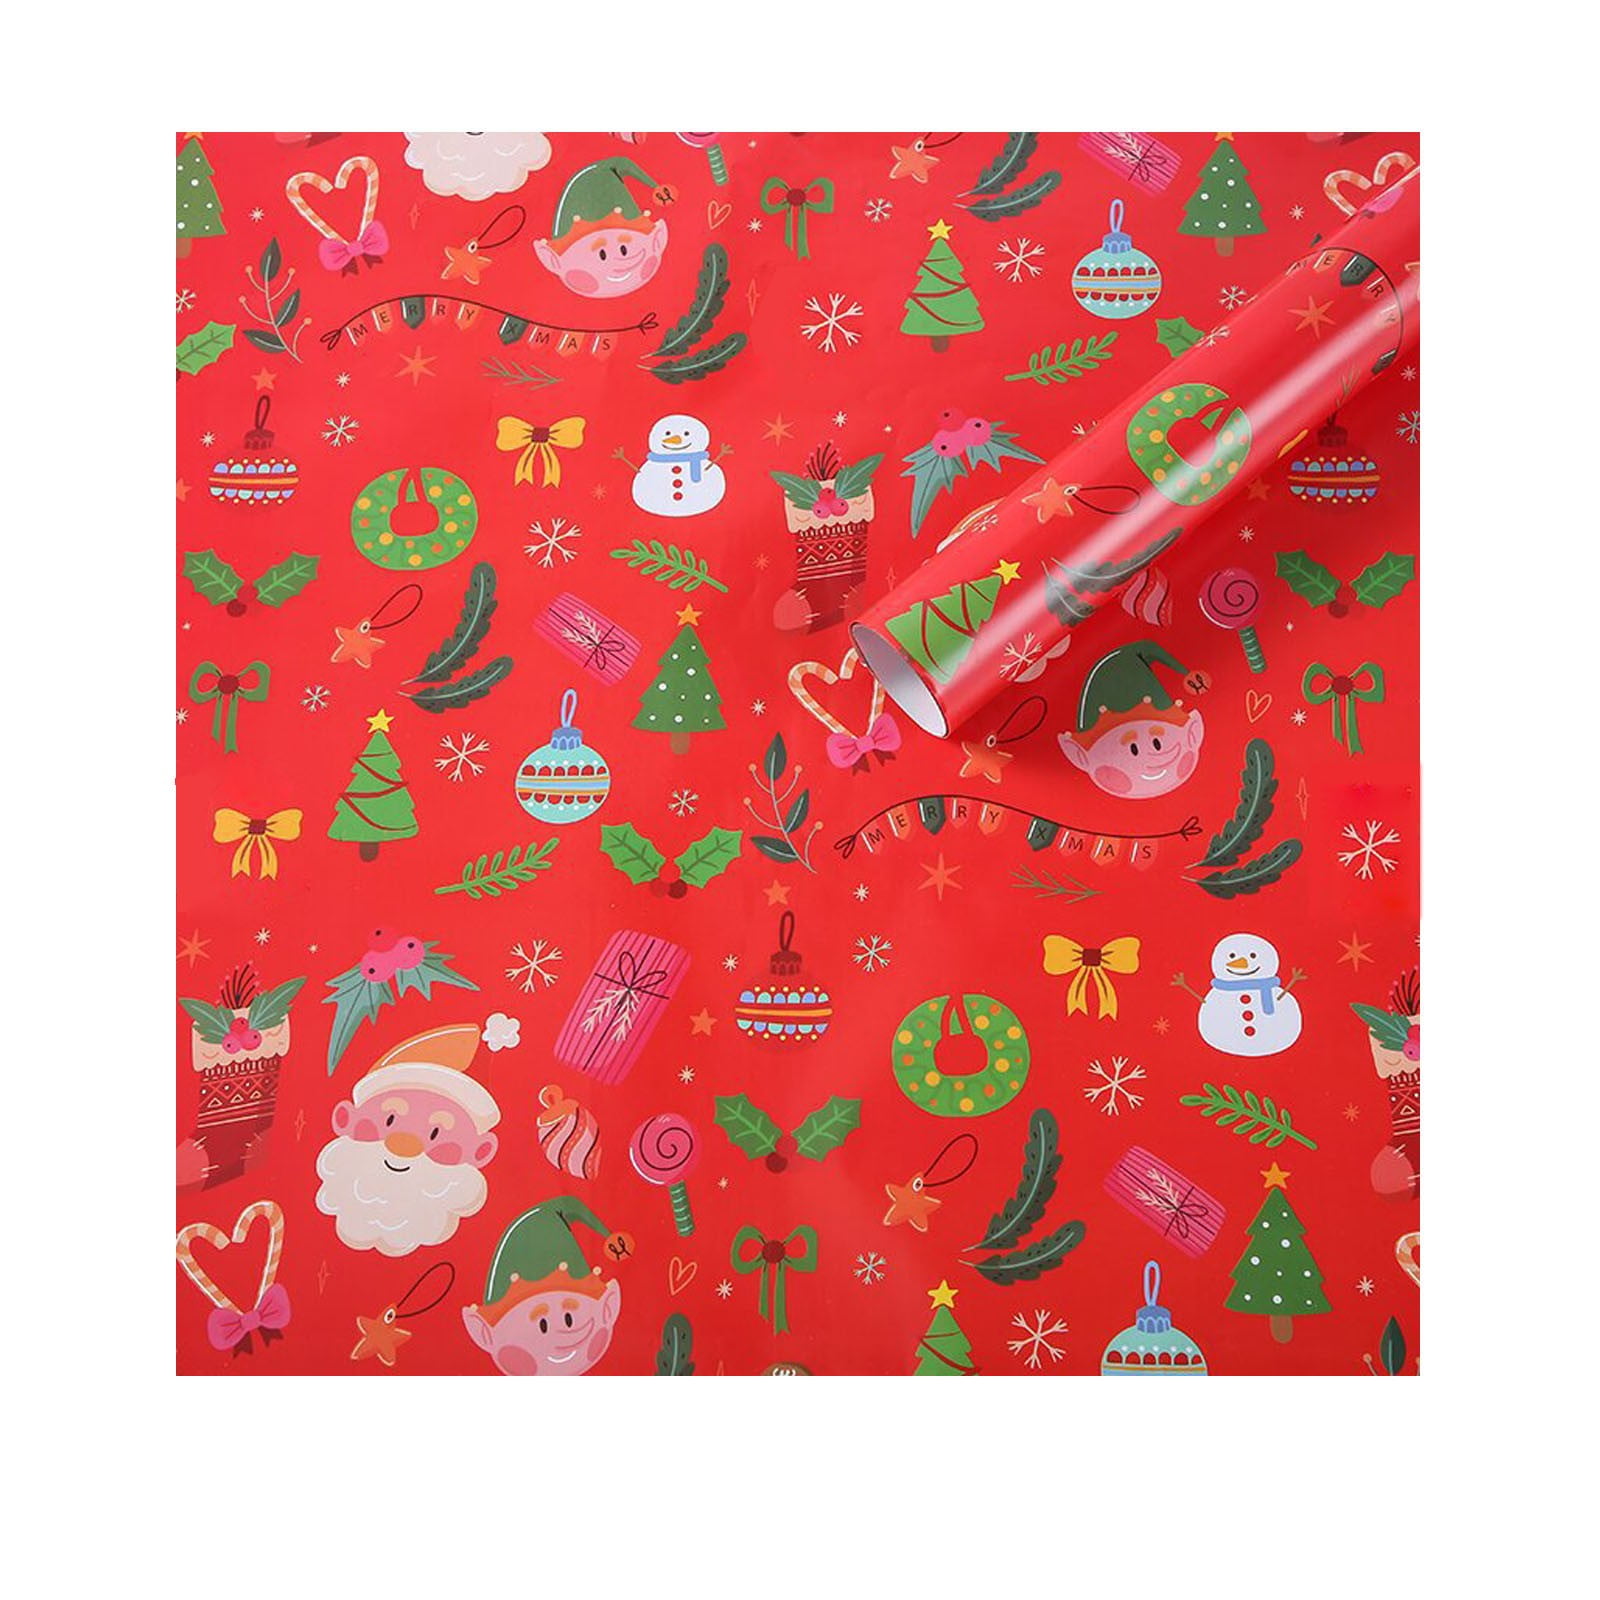 Woodland Christmas Collage Jumbo Rolled Gift Wrap - 1 Giant Roll, 32 feet  Long, Heavyweight, Holiday Wrapping Paper 